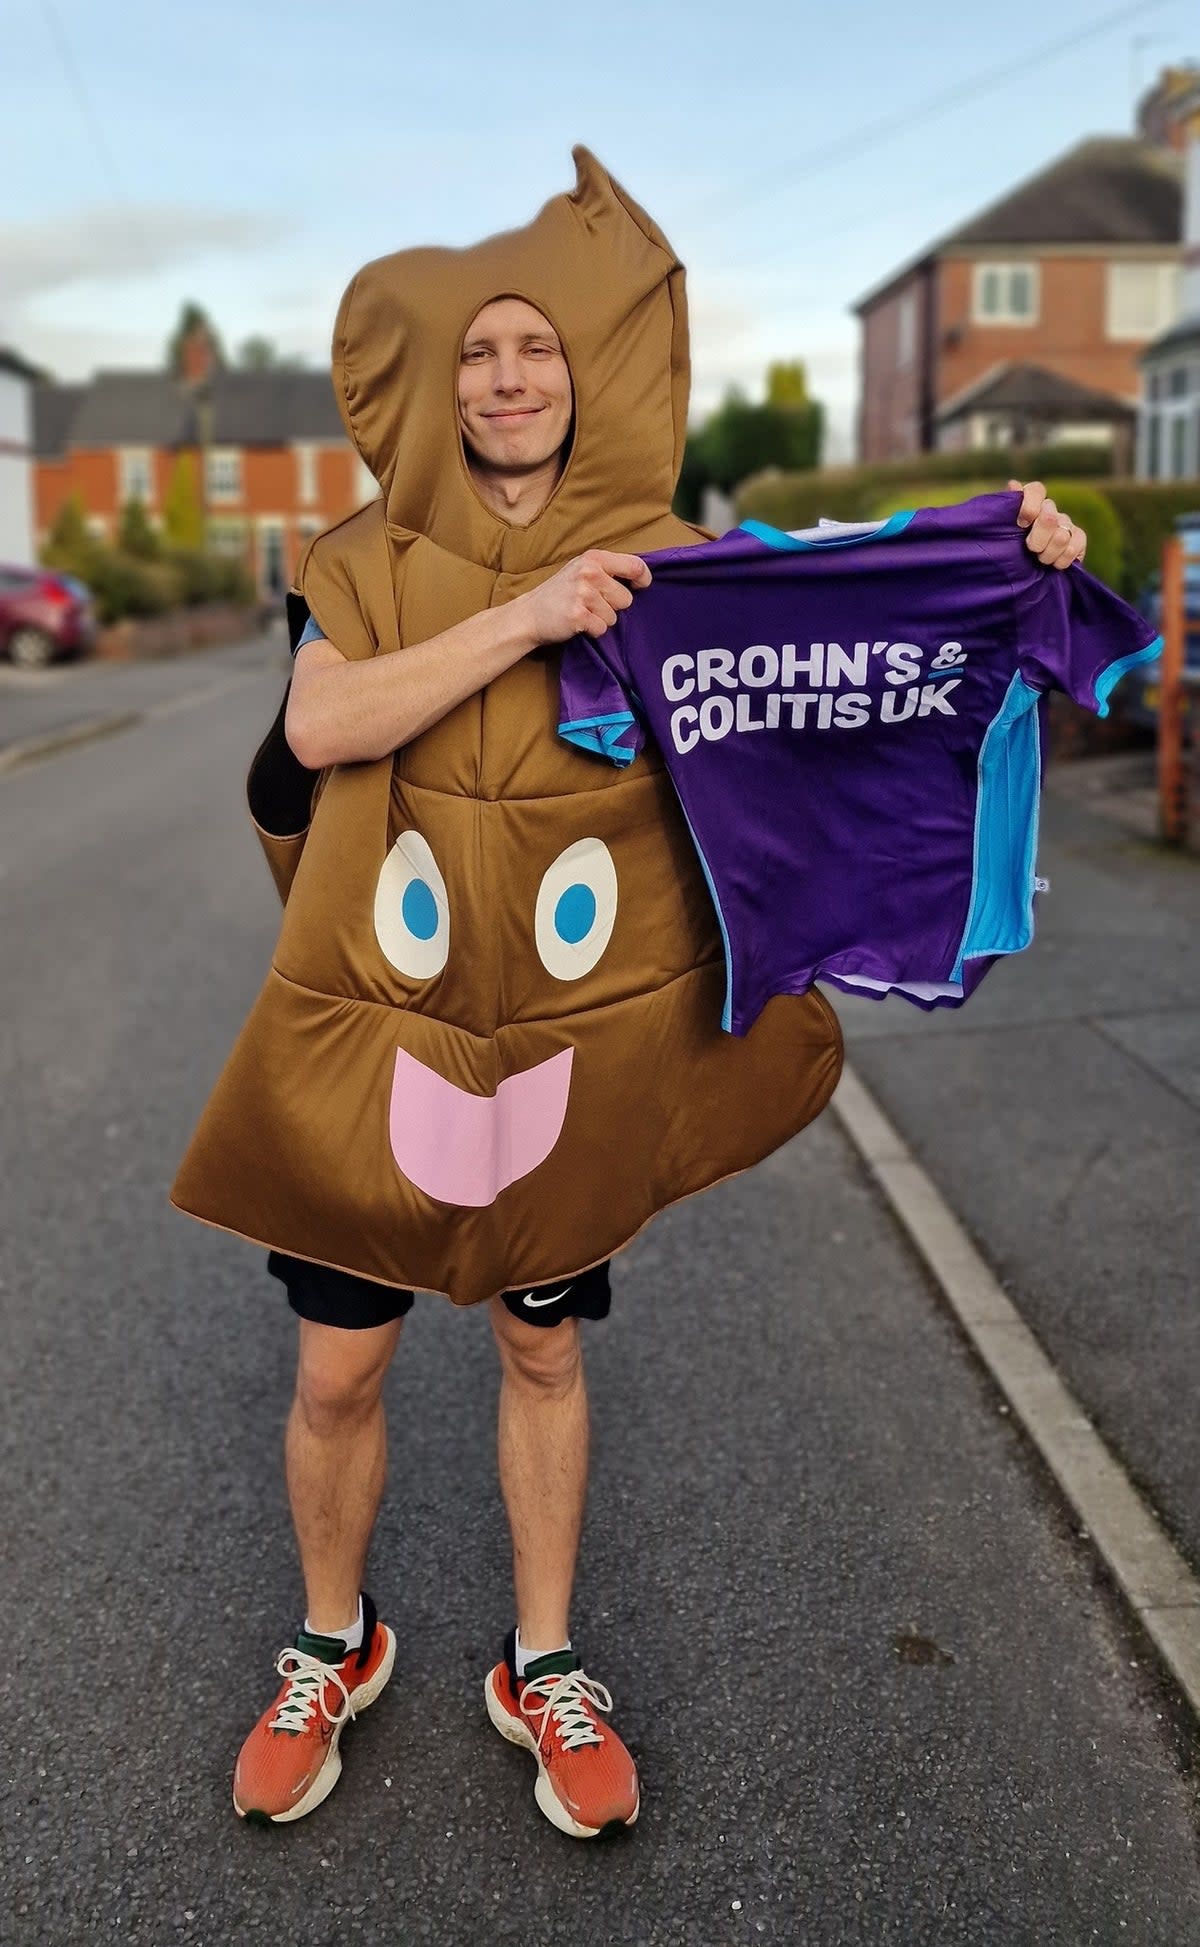 Tom Hall will be running the London Marathon dressed as a giant poo emoji (JustGiving)